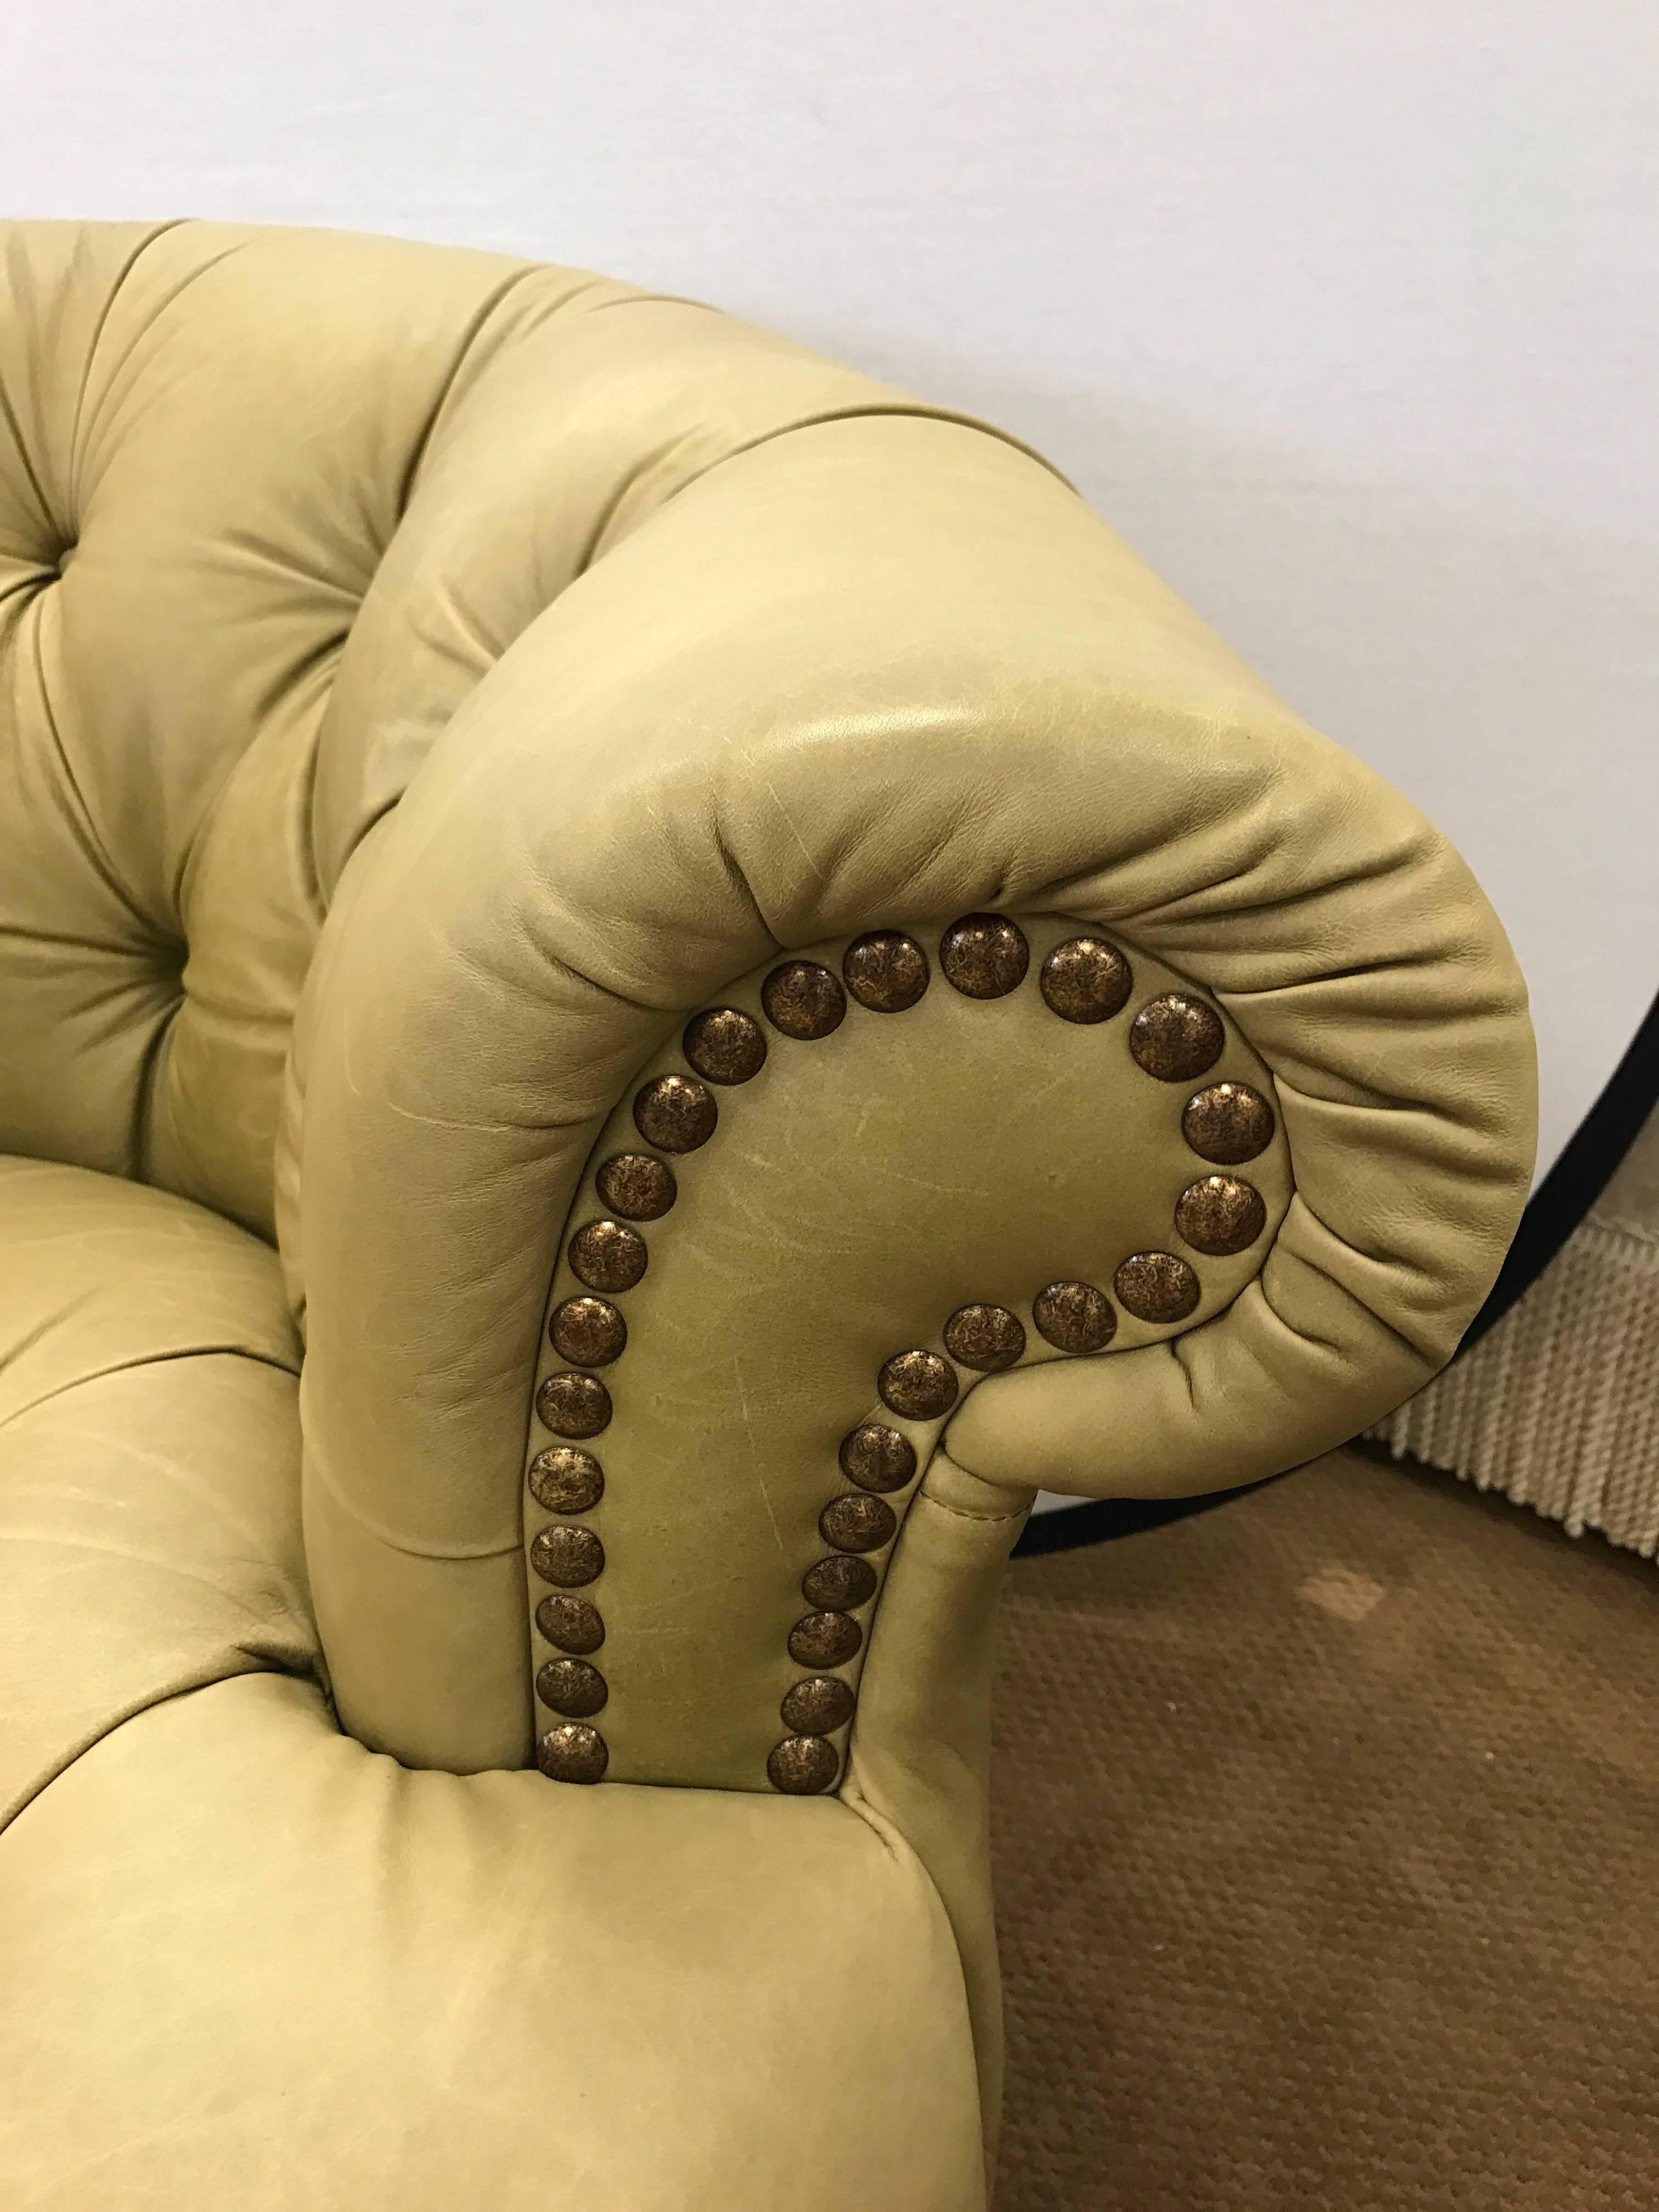 Pair of leather Chesterfield chairs with nailhead trim. Made in Italy. Features unusual pale olive leather color scheme.